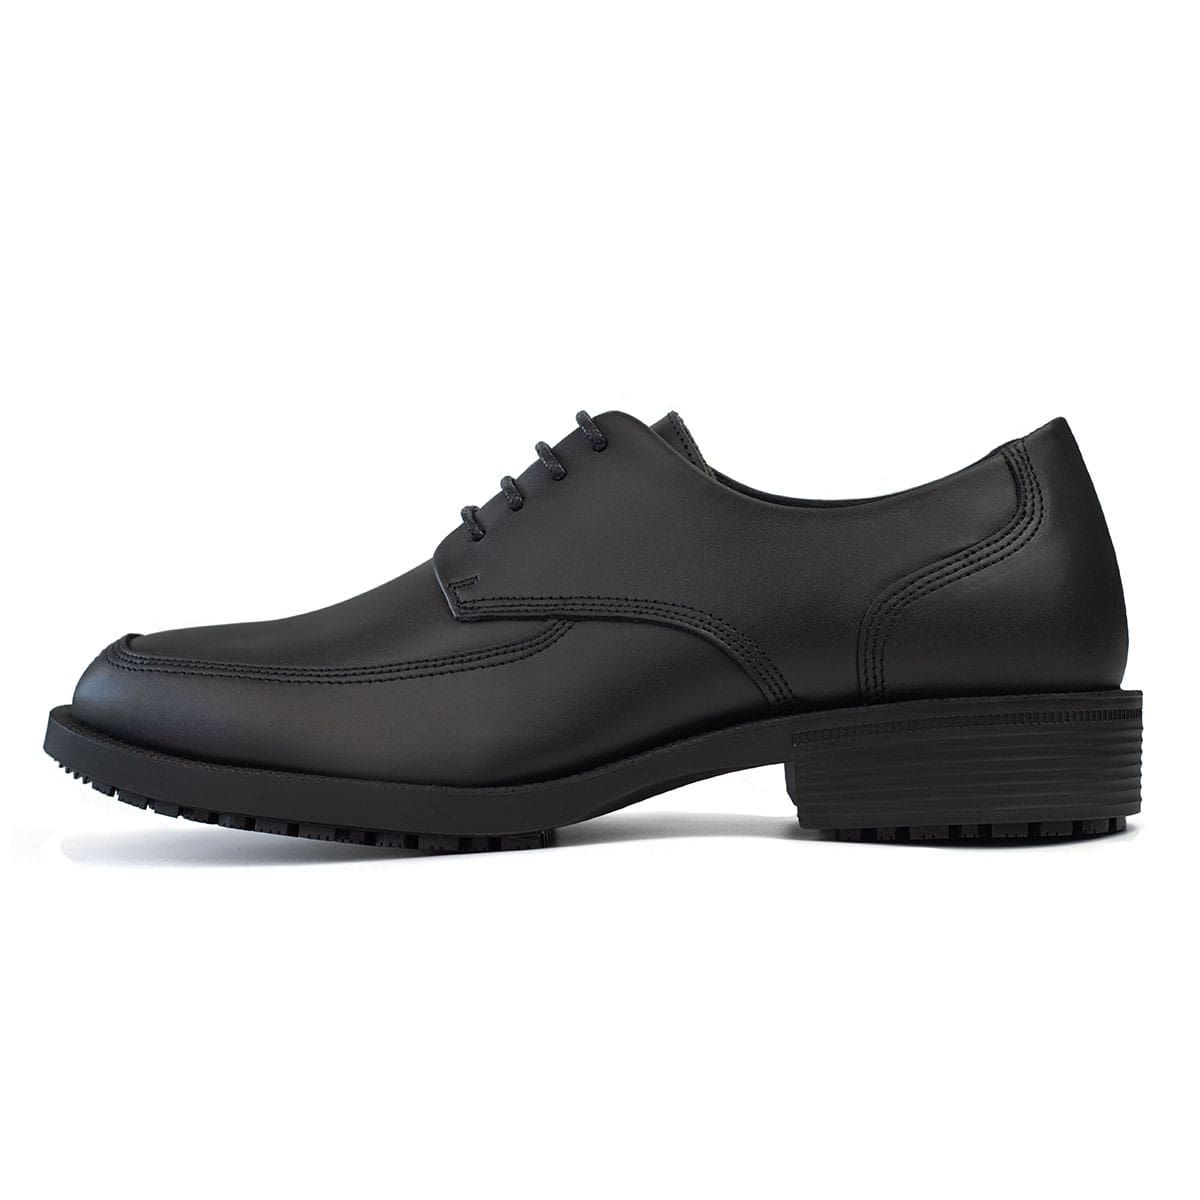 Slip resistant black formal shoe with waterproof leather upper and a removable, cushioned insole, left side view.